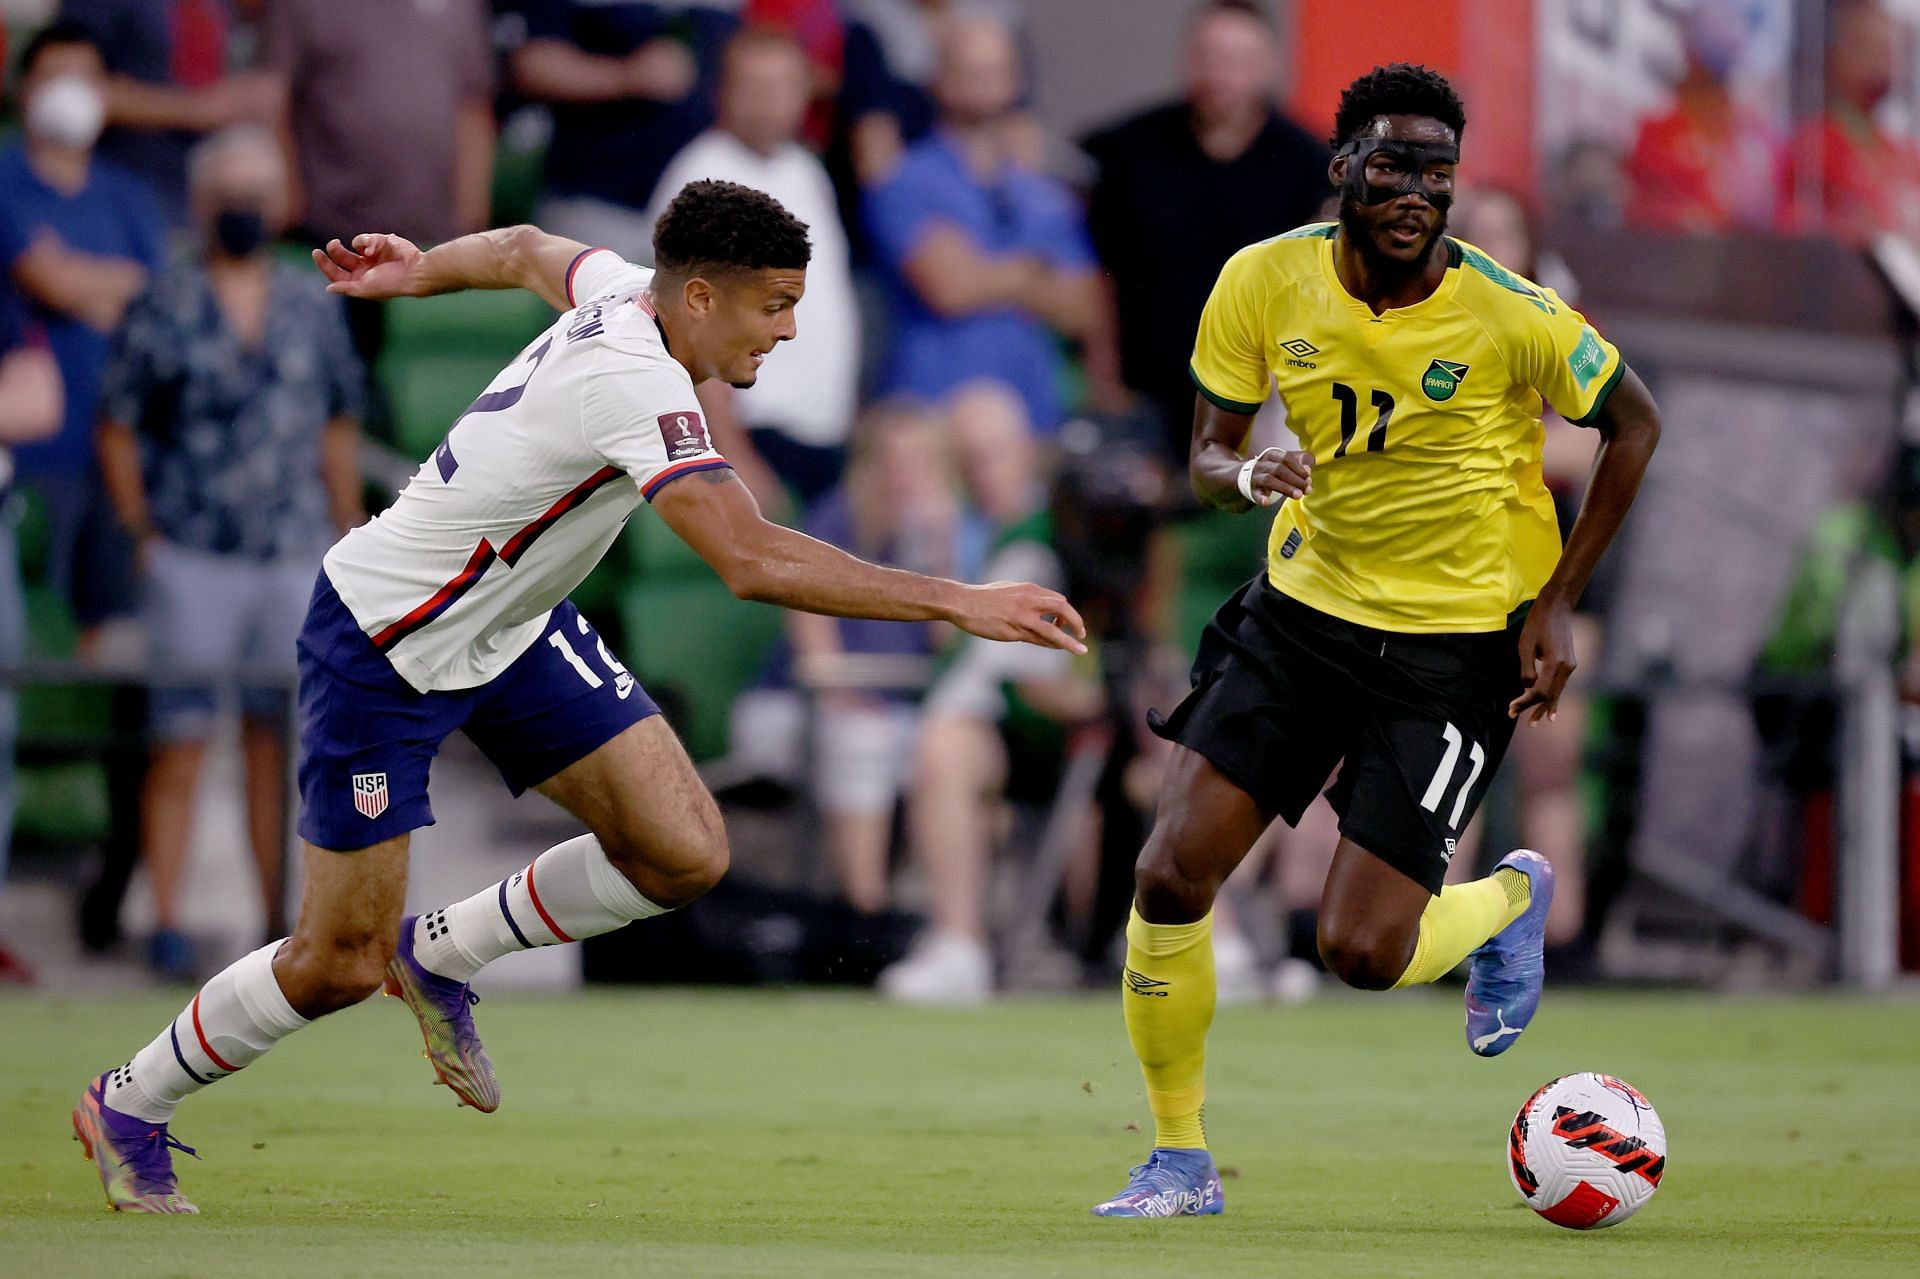 Jamaica have a point to prove